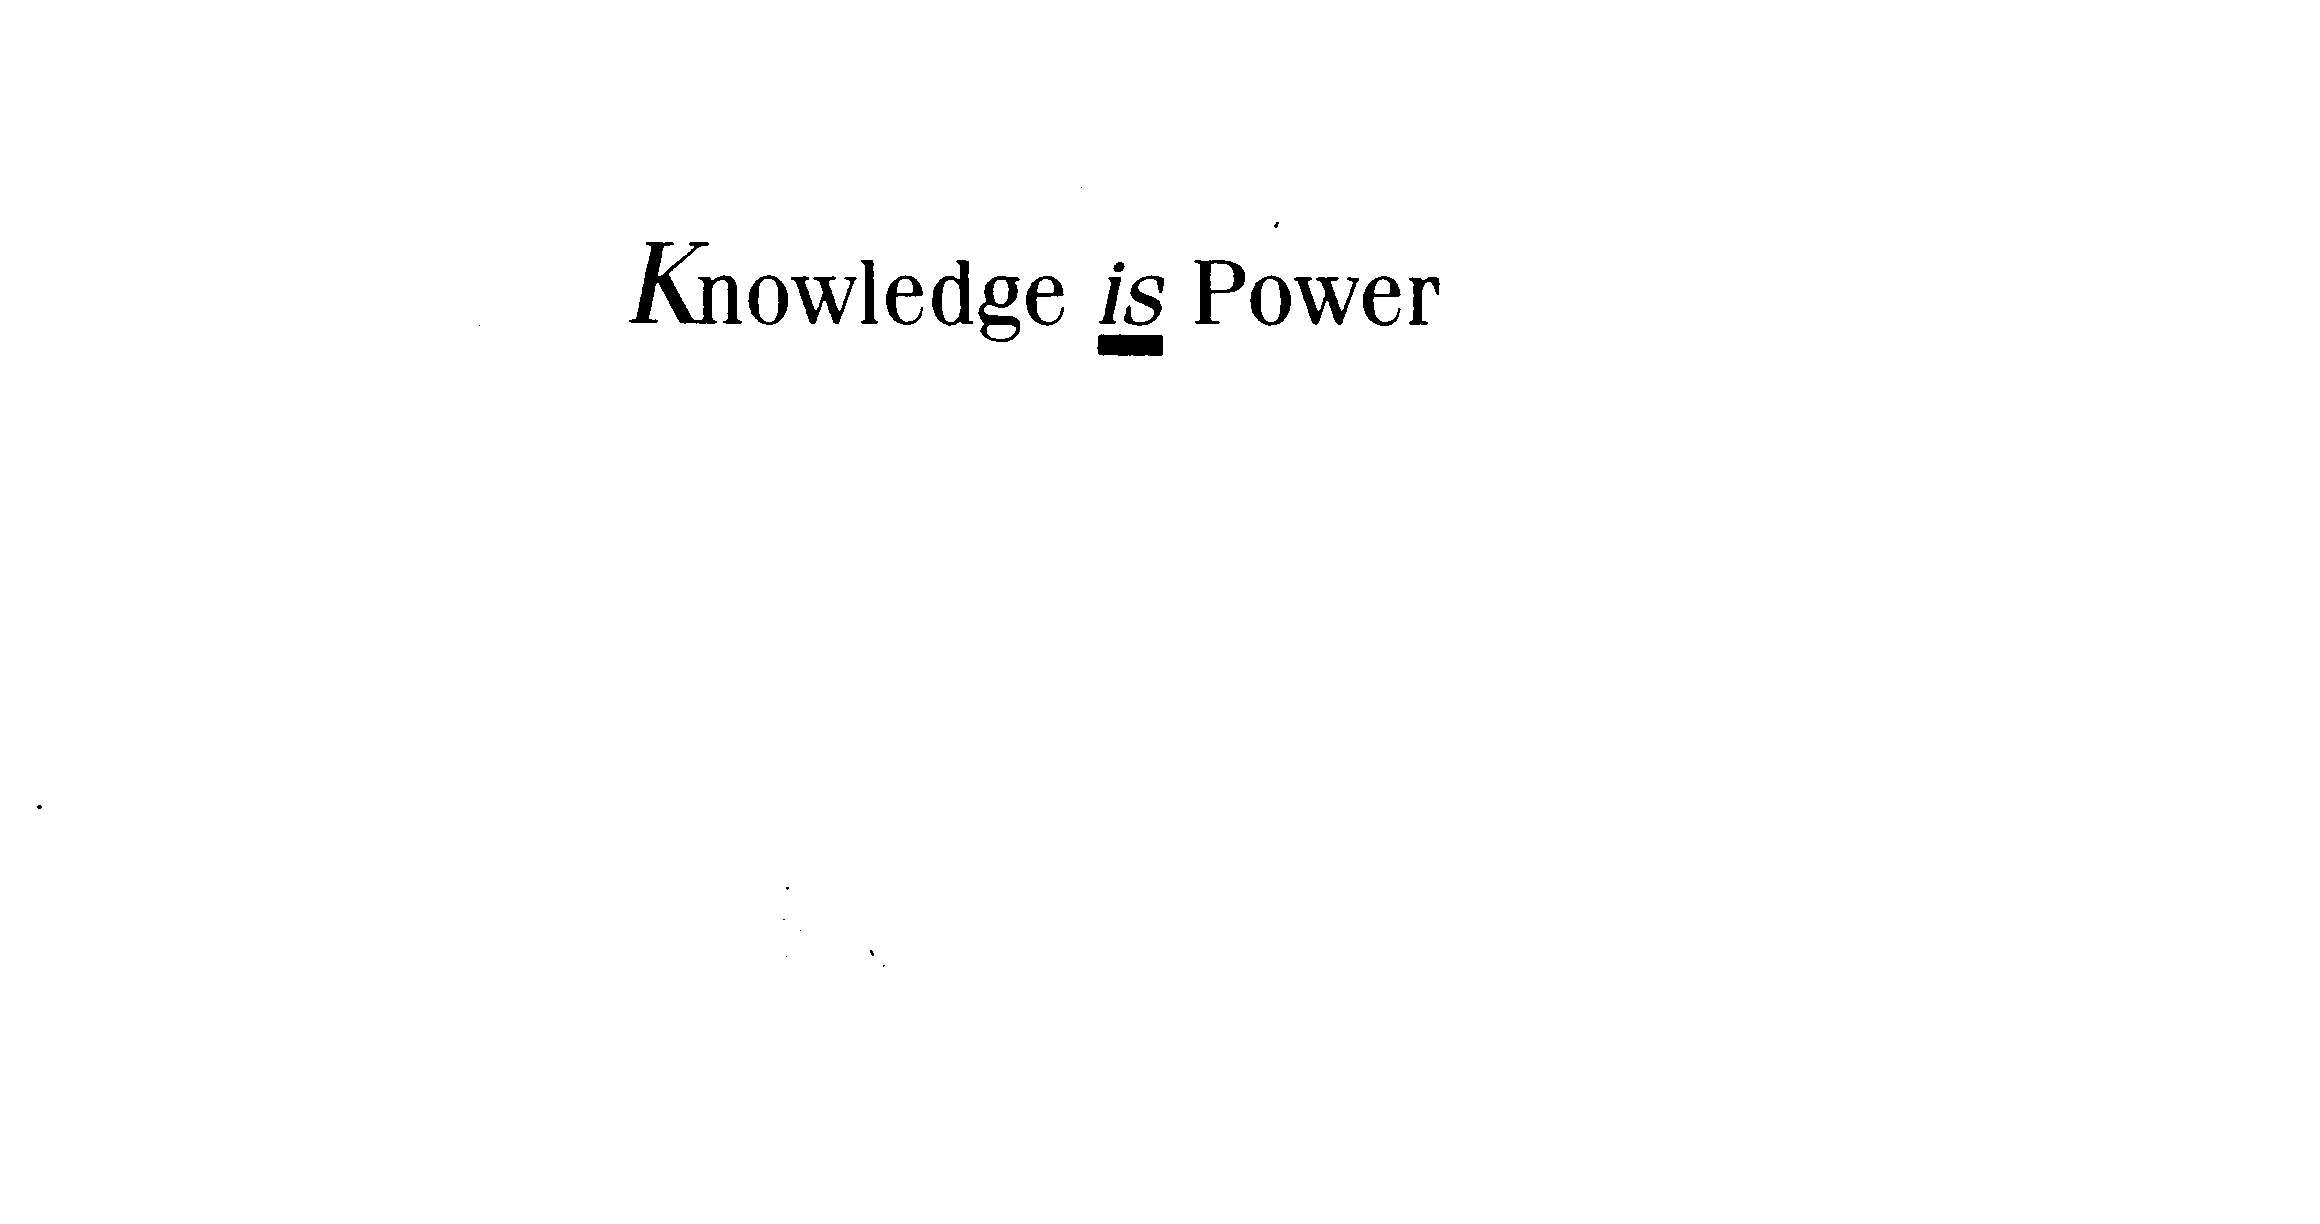 KNOWLEDGE IS POWER